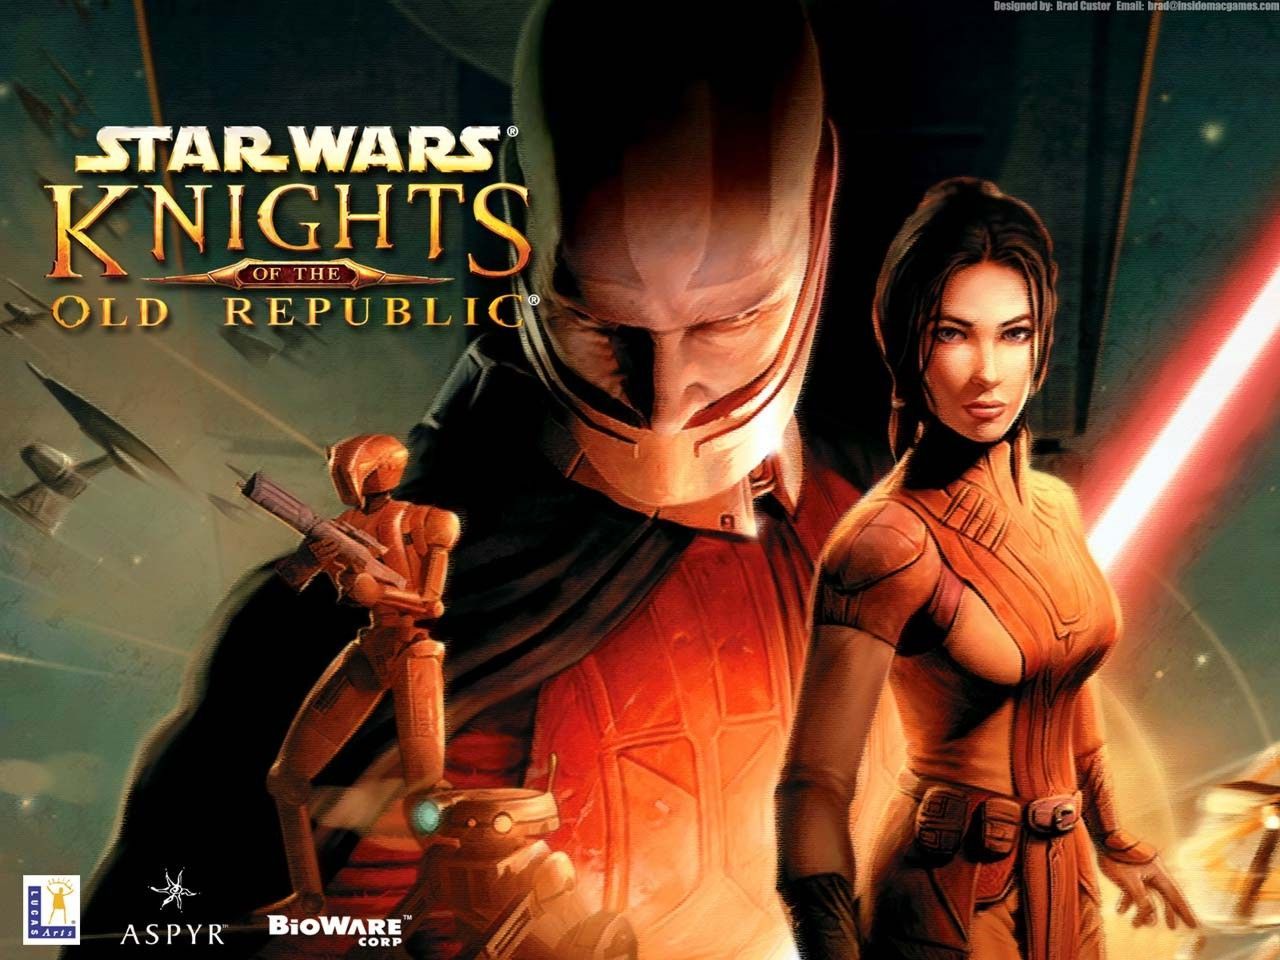 Star Wars Knights of the Old Republic Movie?